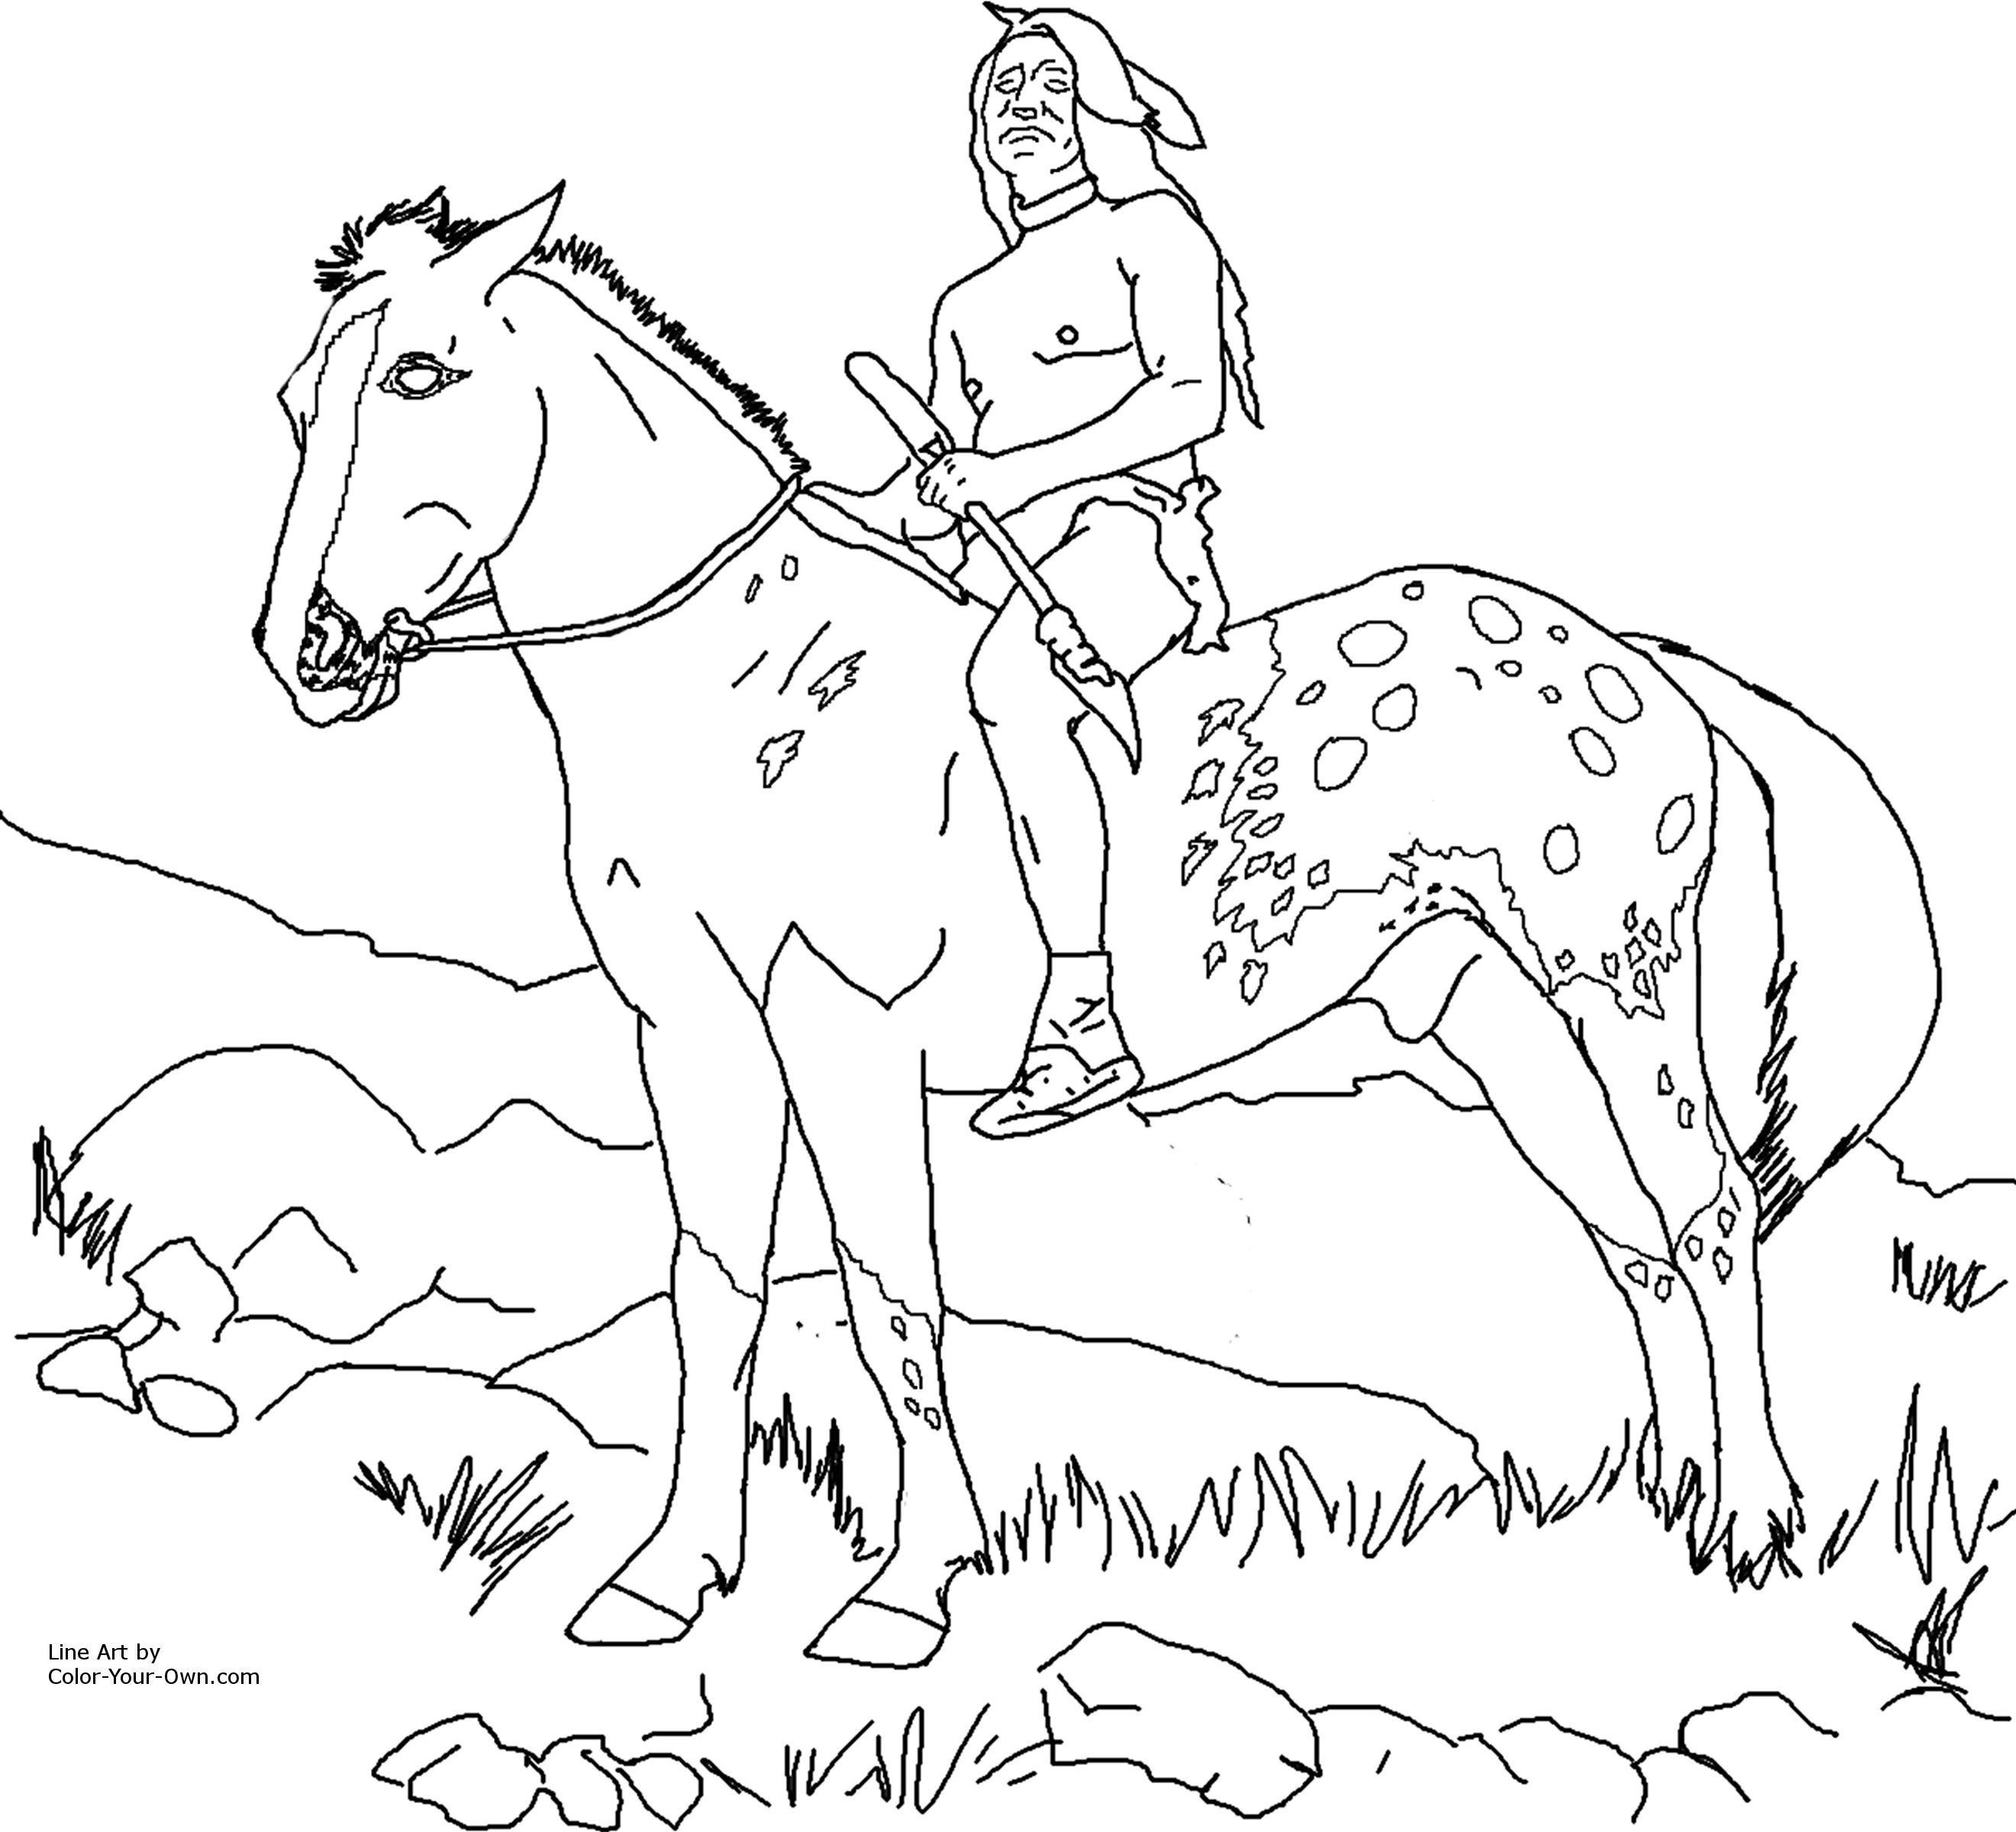 Nez perce native american on appaloosa horse coloring page